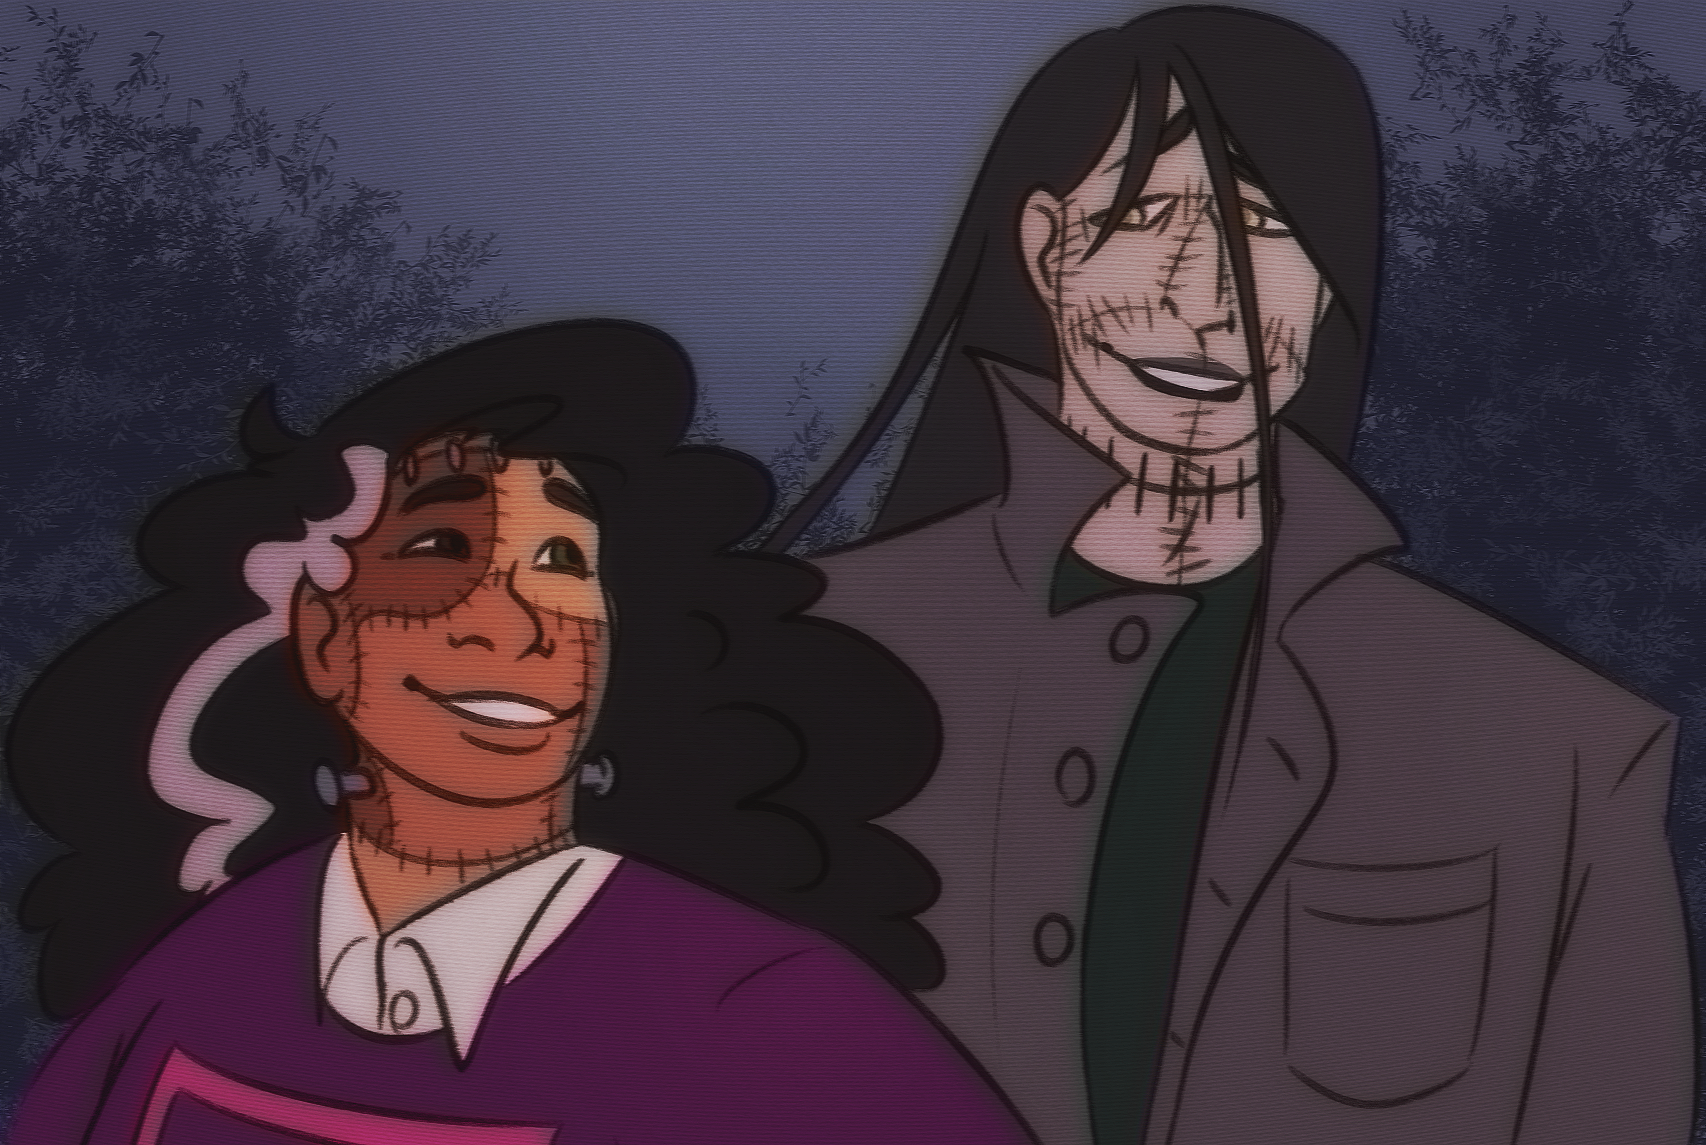 A drawing of Emmett and Steve at night, shown from the middle of the chest up. They're looking over at each other with smiles on their faces.